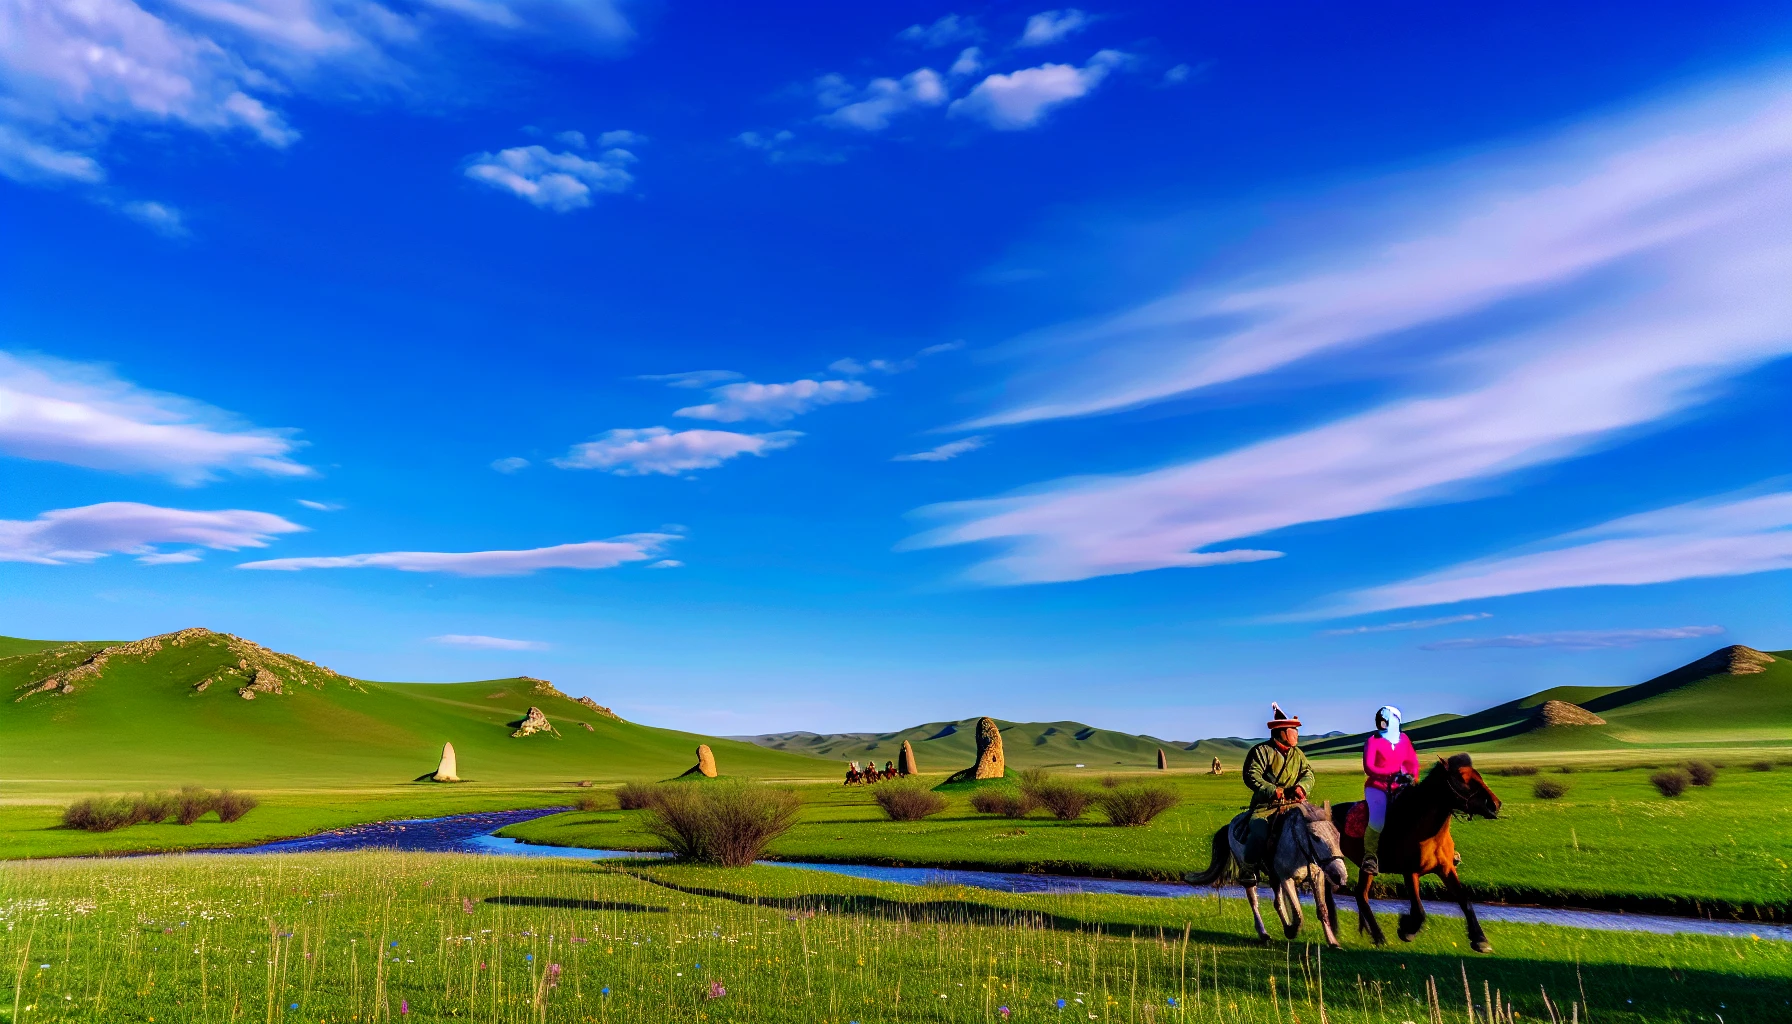 Orkhon Valley in Central Mongolia, ideal for horseback riding